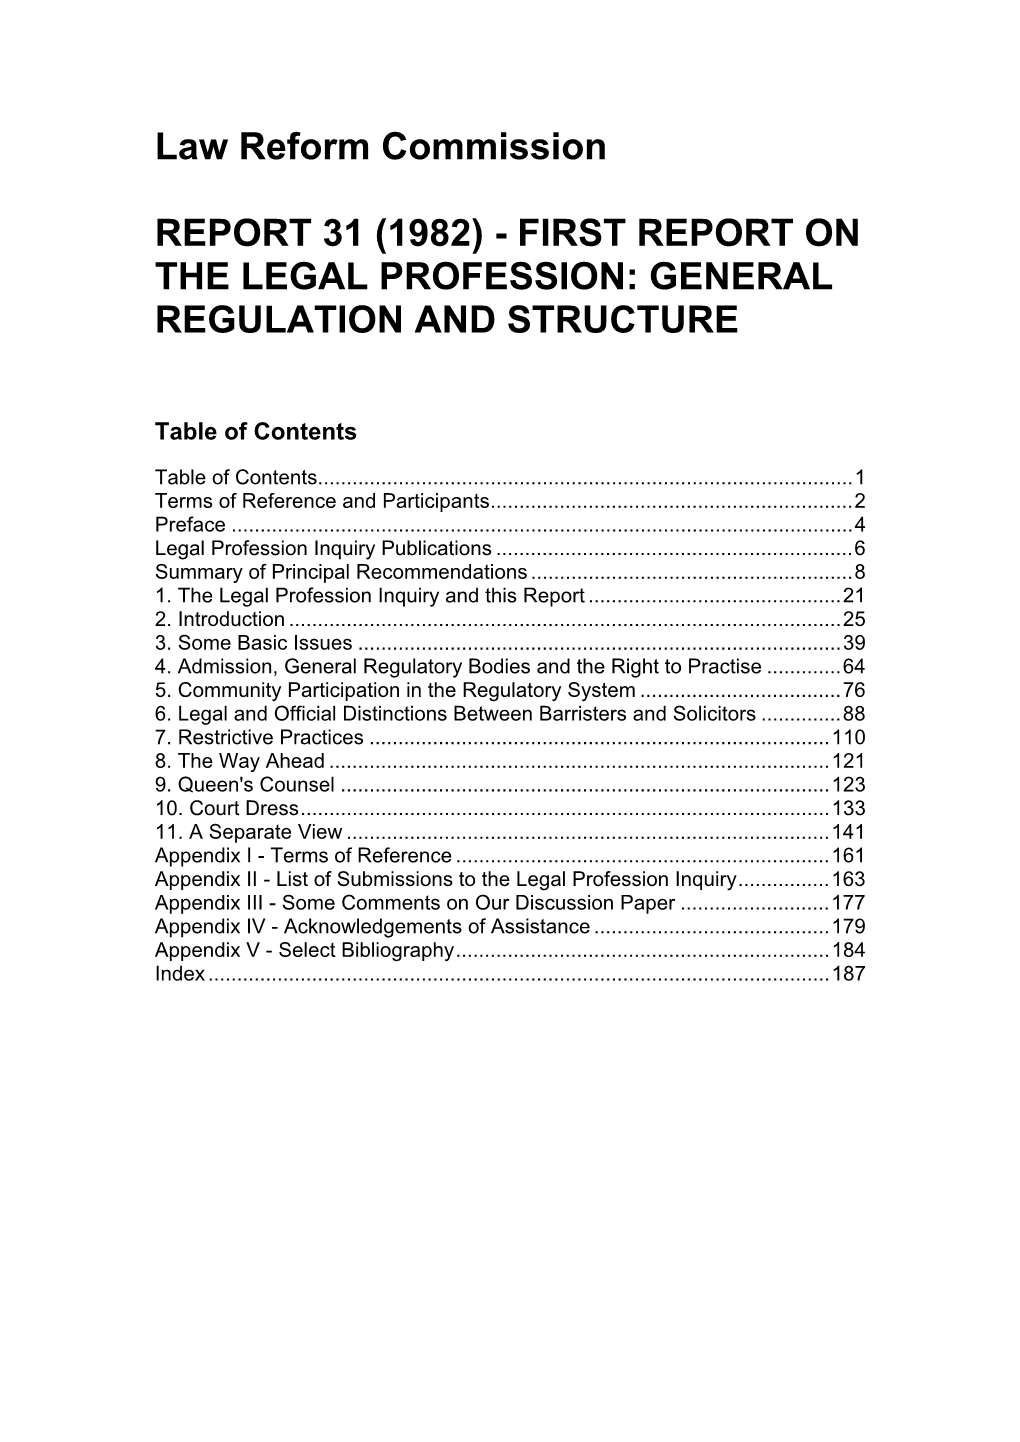 First Report on the Legal Profession: General Regulation and Structure